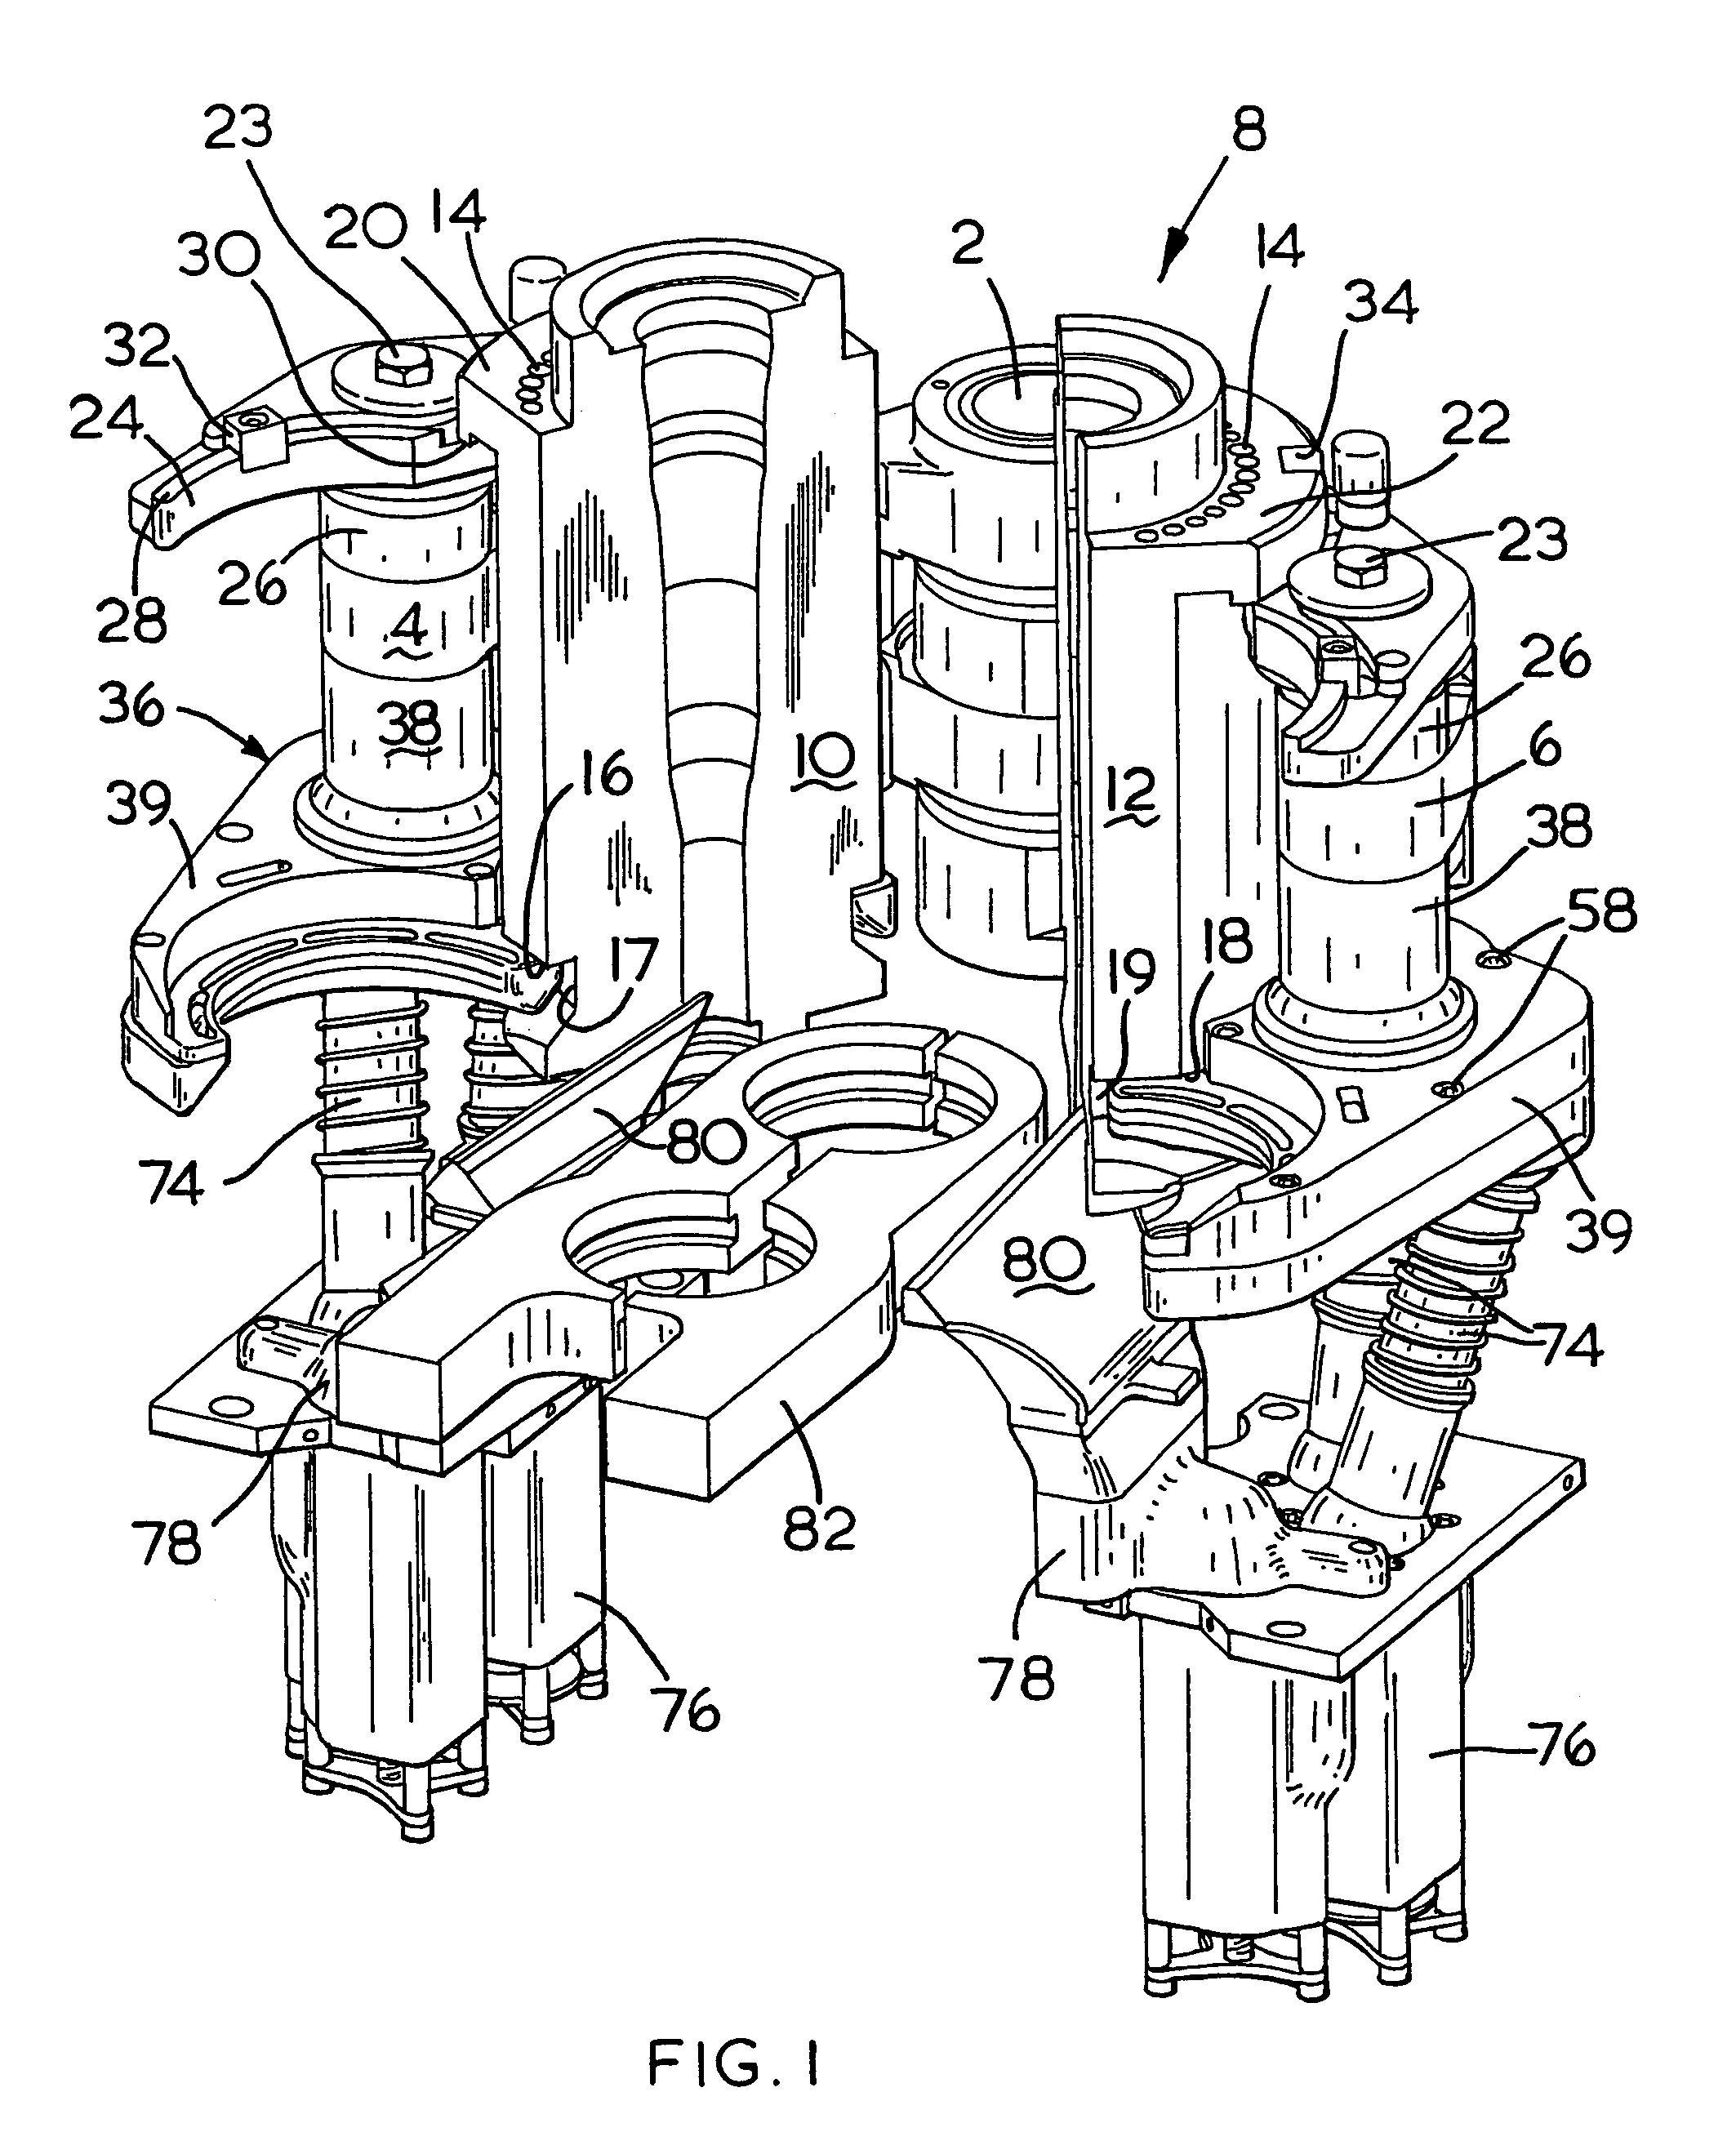 Mold support mechanism for an I.S. machine